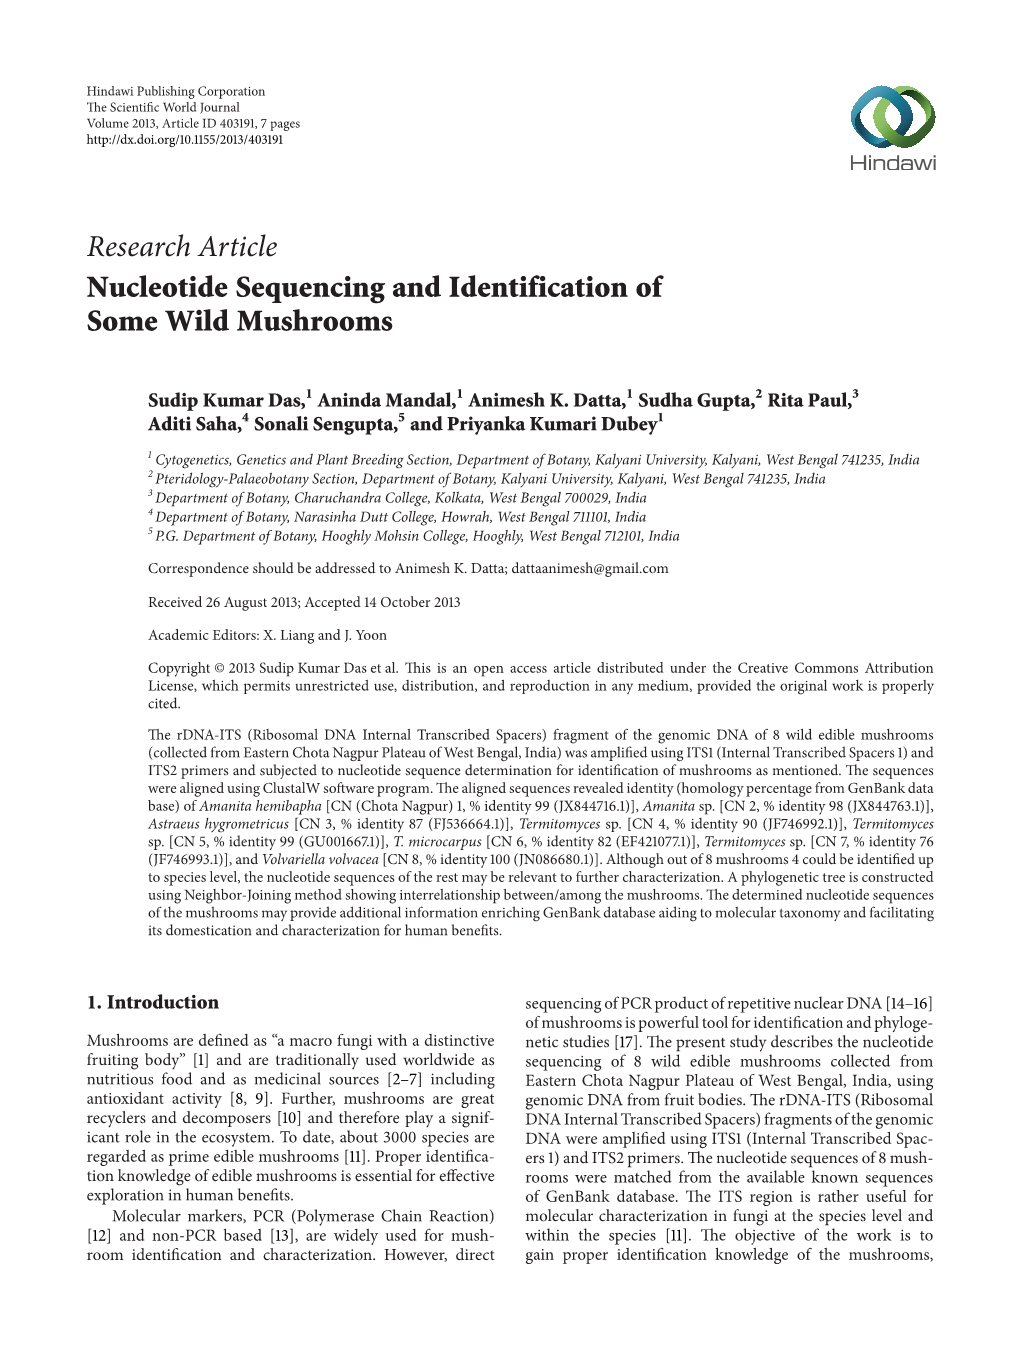 Nucleotide Sequencing and Identification of Some Wild Mushrooms